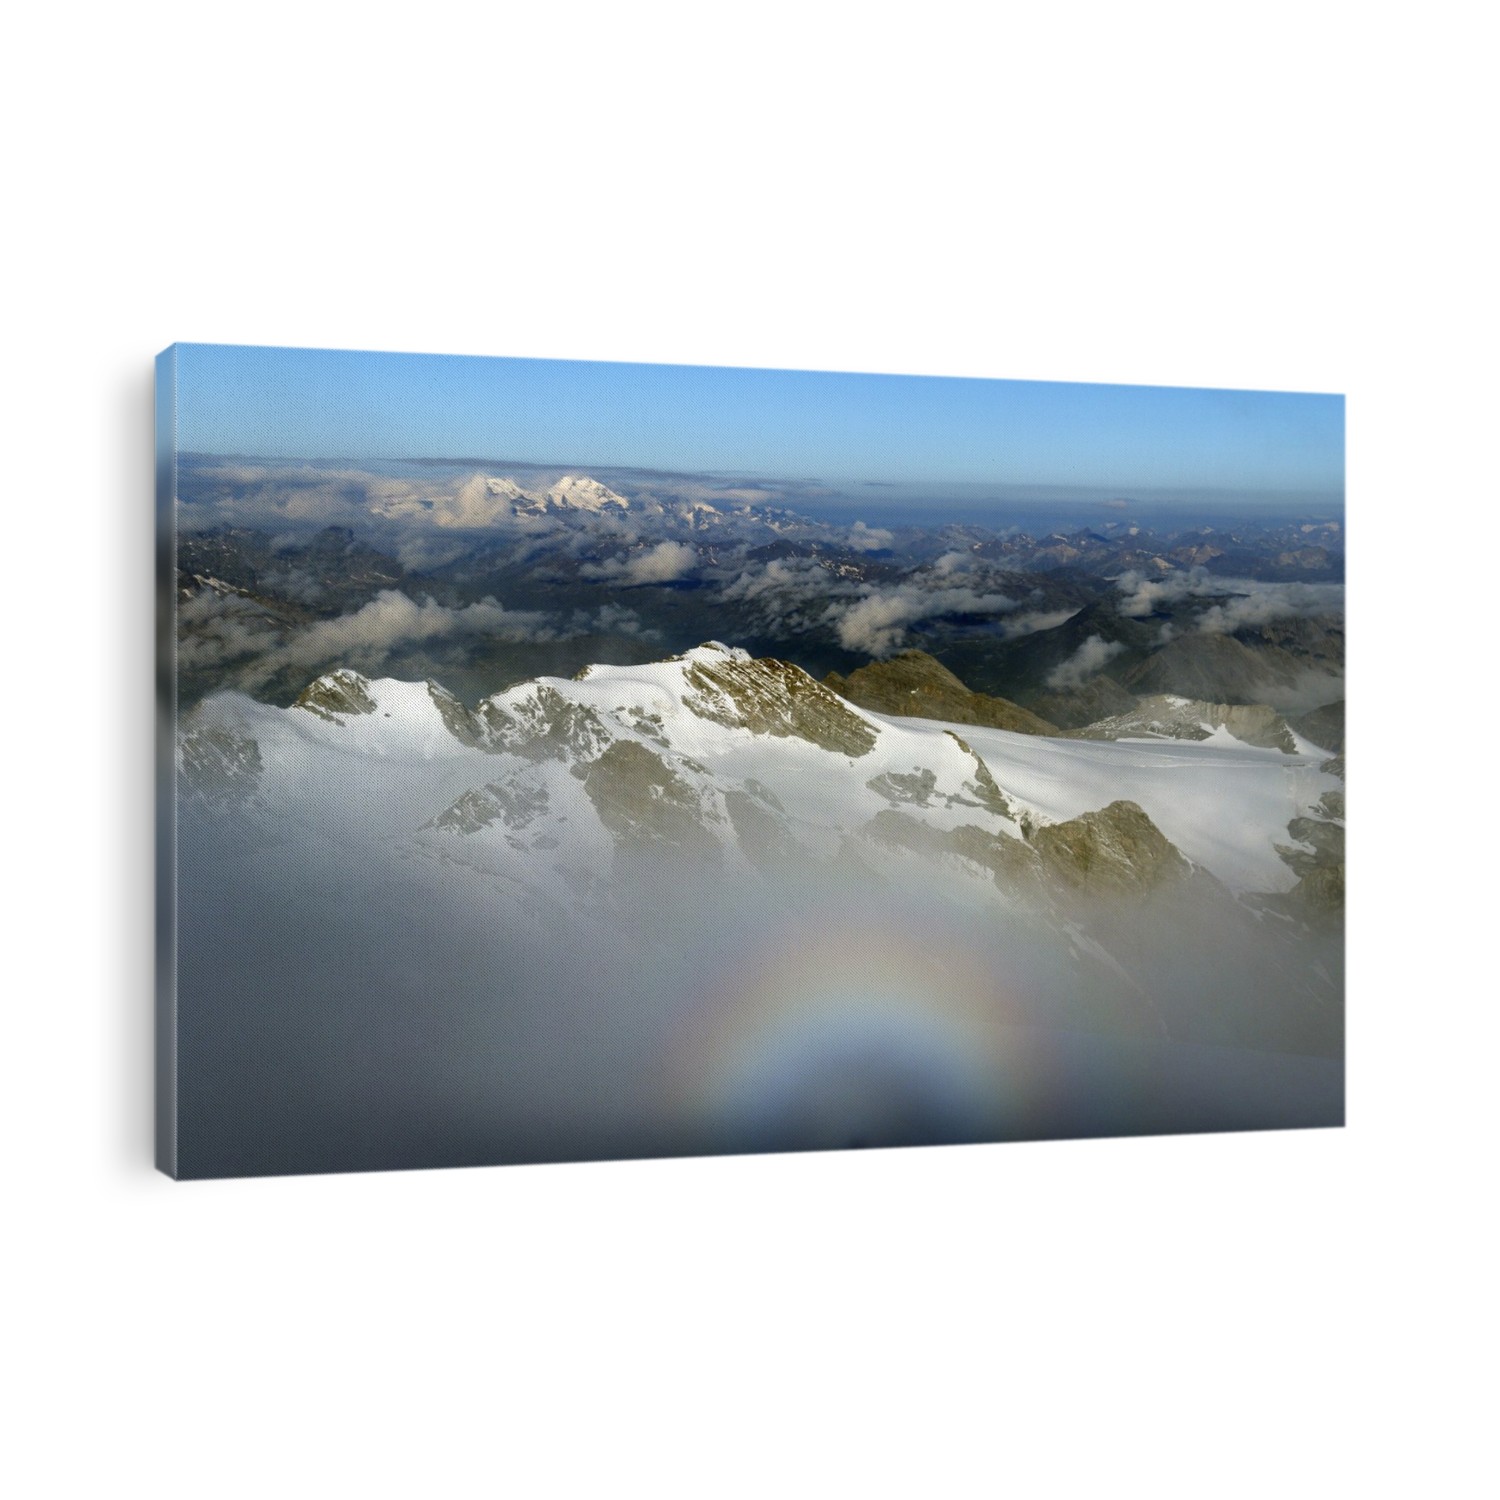 Italian-Swiss Alps. View looking west from the summit of Mount Ortler (3905 metres) towards the peaks of the Bernina Range. The highest peak in that range, Piz Bernina (4049 metres) is in the distance at upper left. The rainbow-like feature in the fog at bottom is an aureole. Photographed in August.